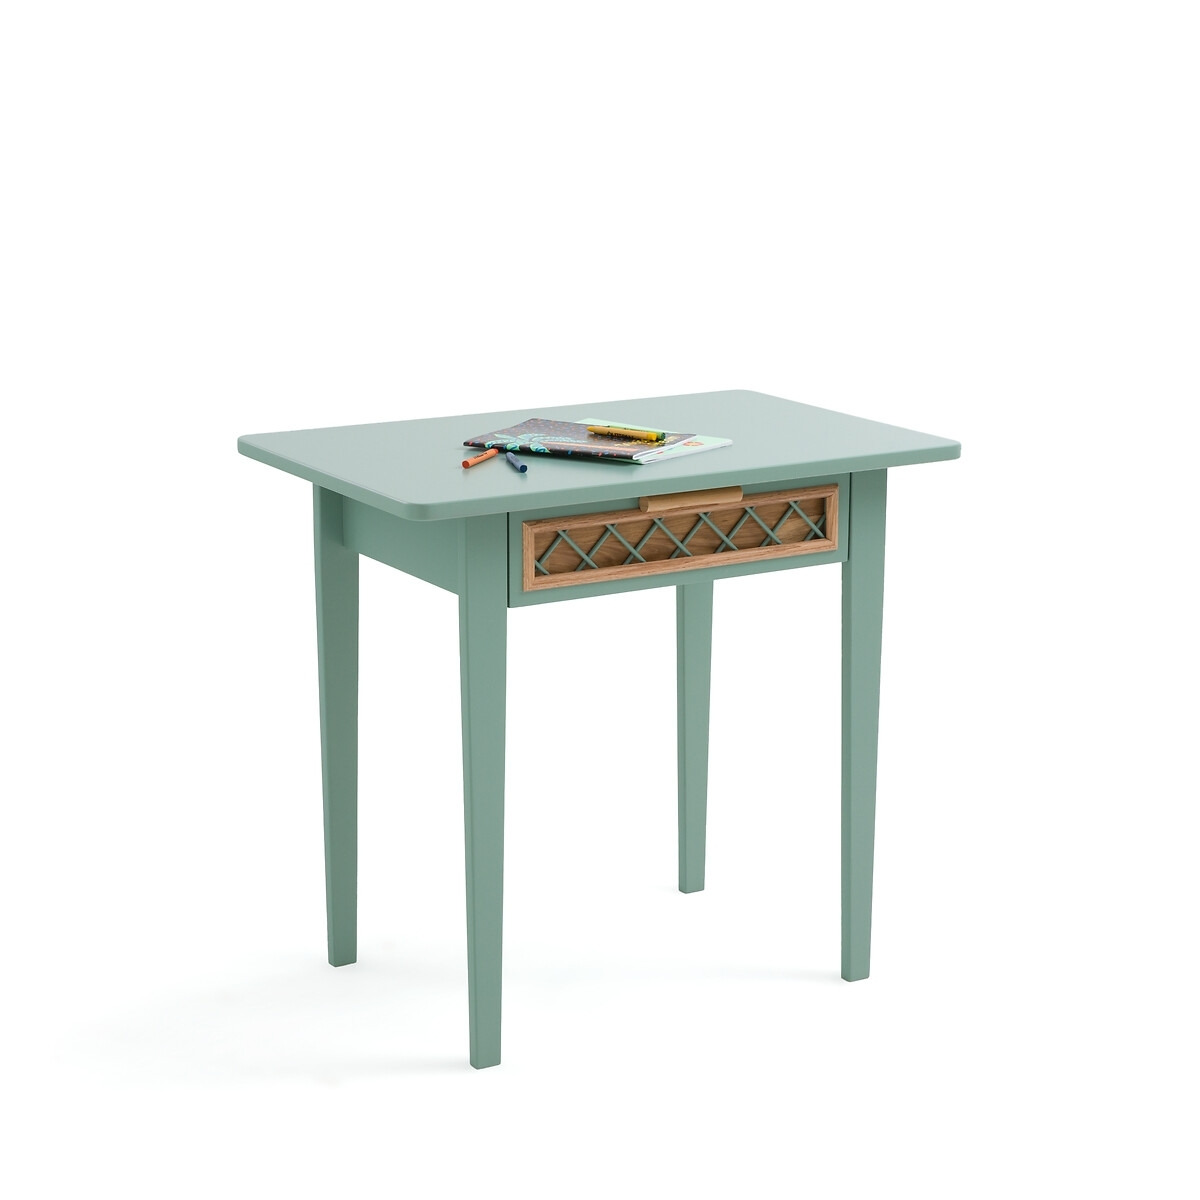 Croisille Child's Desk with Drawer - image 1